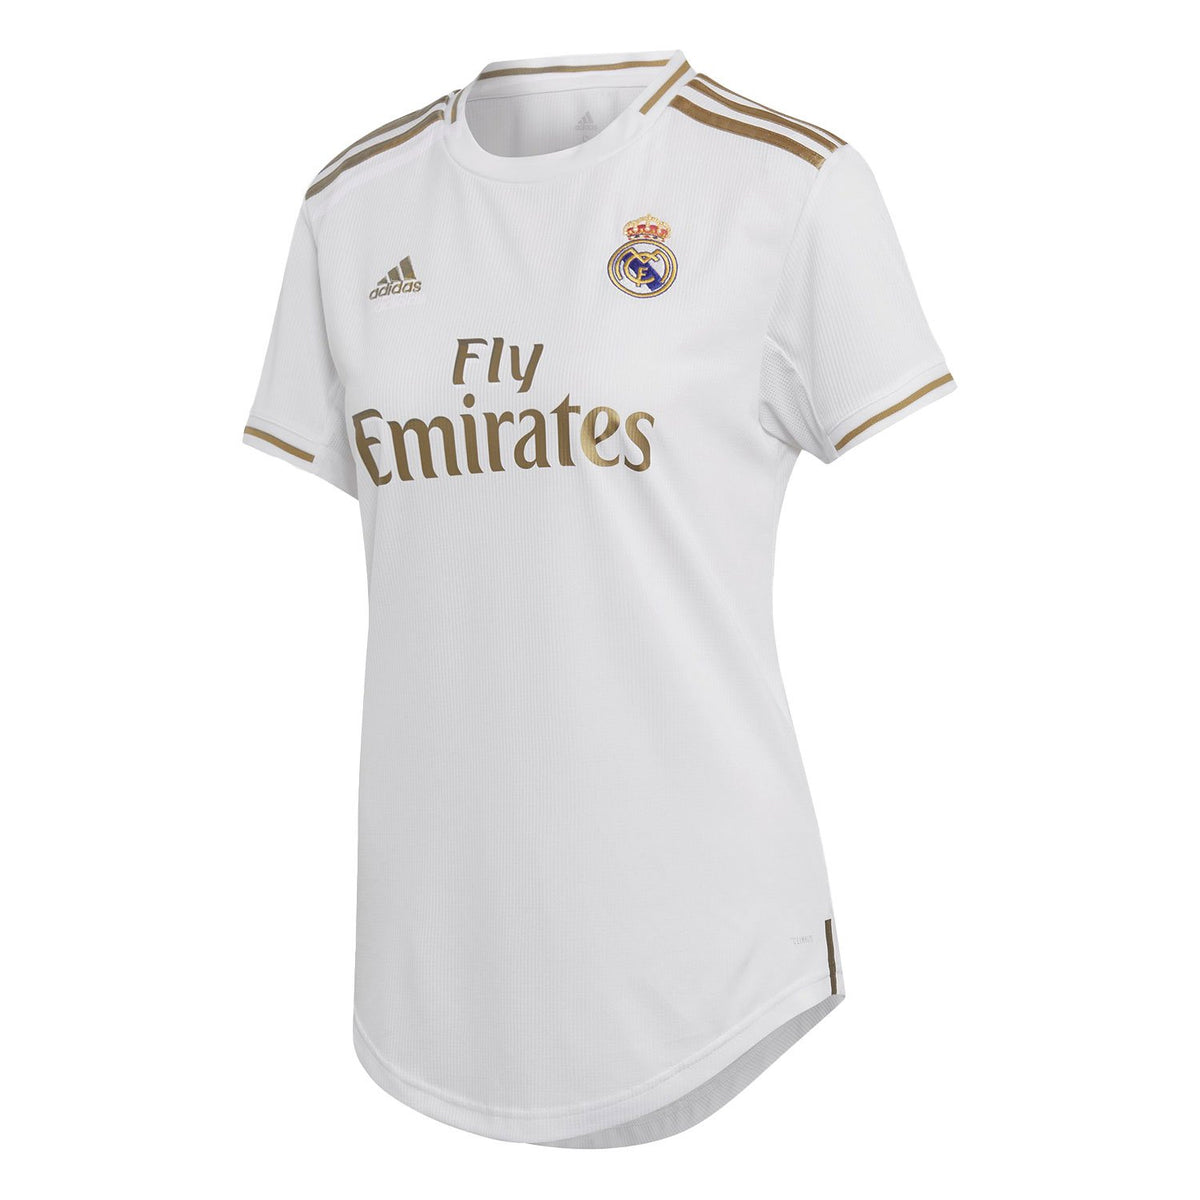 fly emirates women's jersey